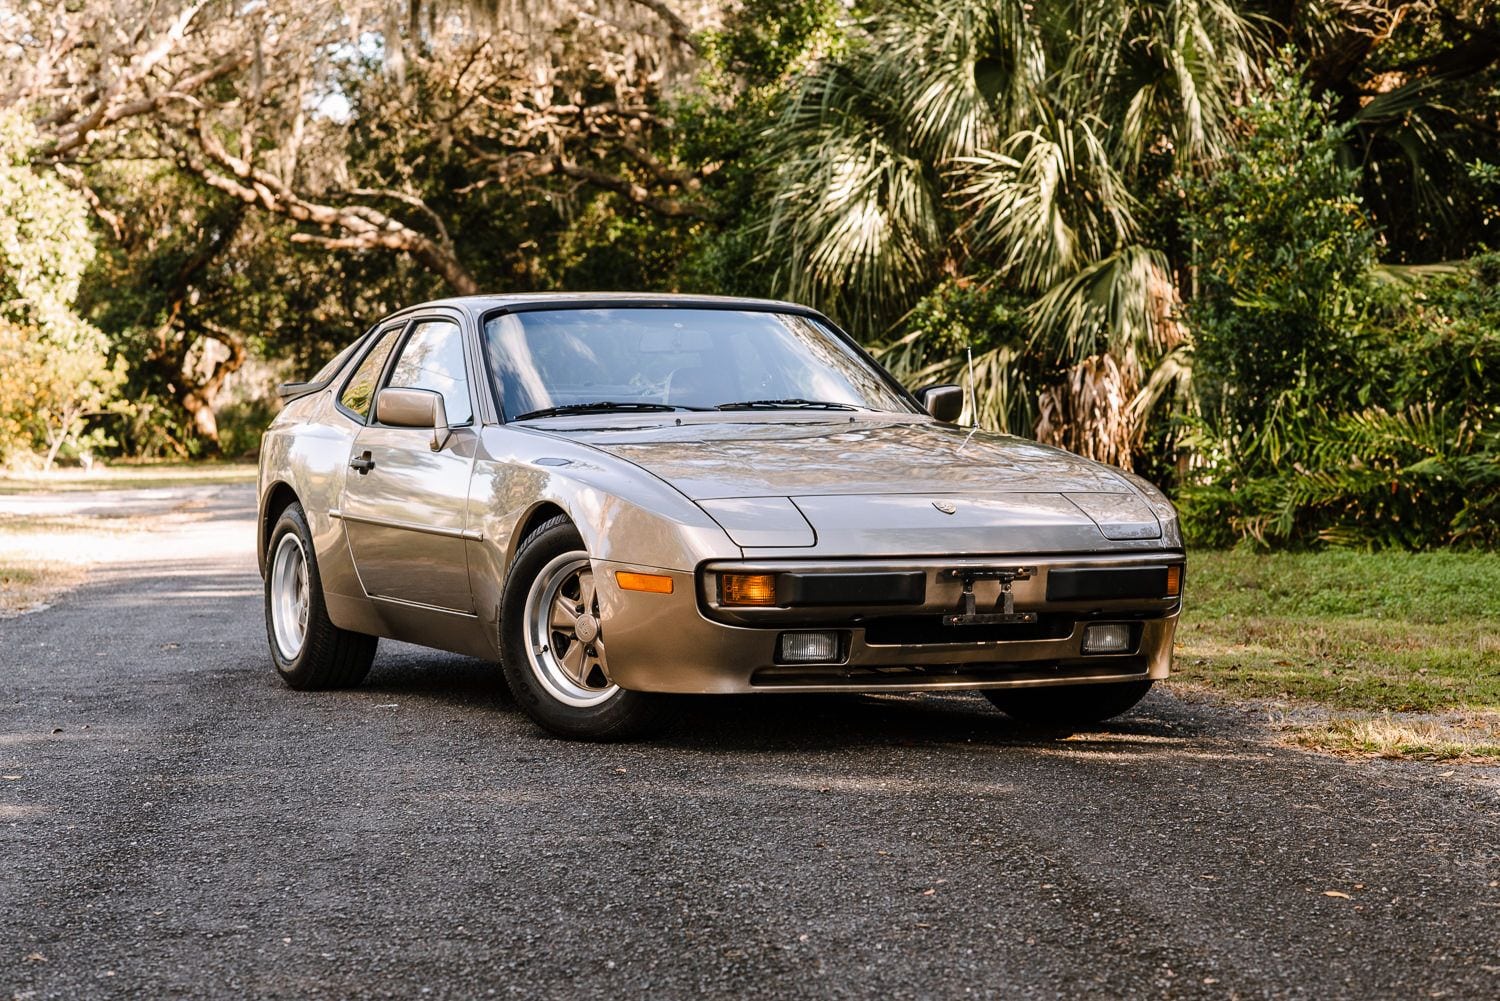 1984 Porsche 944 - 1984 PORSCHE 944 ONE OWNER BONE STOCK 56K MILES - Used - VIN WP0AA094XEN460705 - 56,000 Miles - 4 cyl - 2WD - Manual - Coupe - Gold - New Port Richey, FL 34652, United States